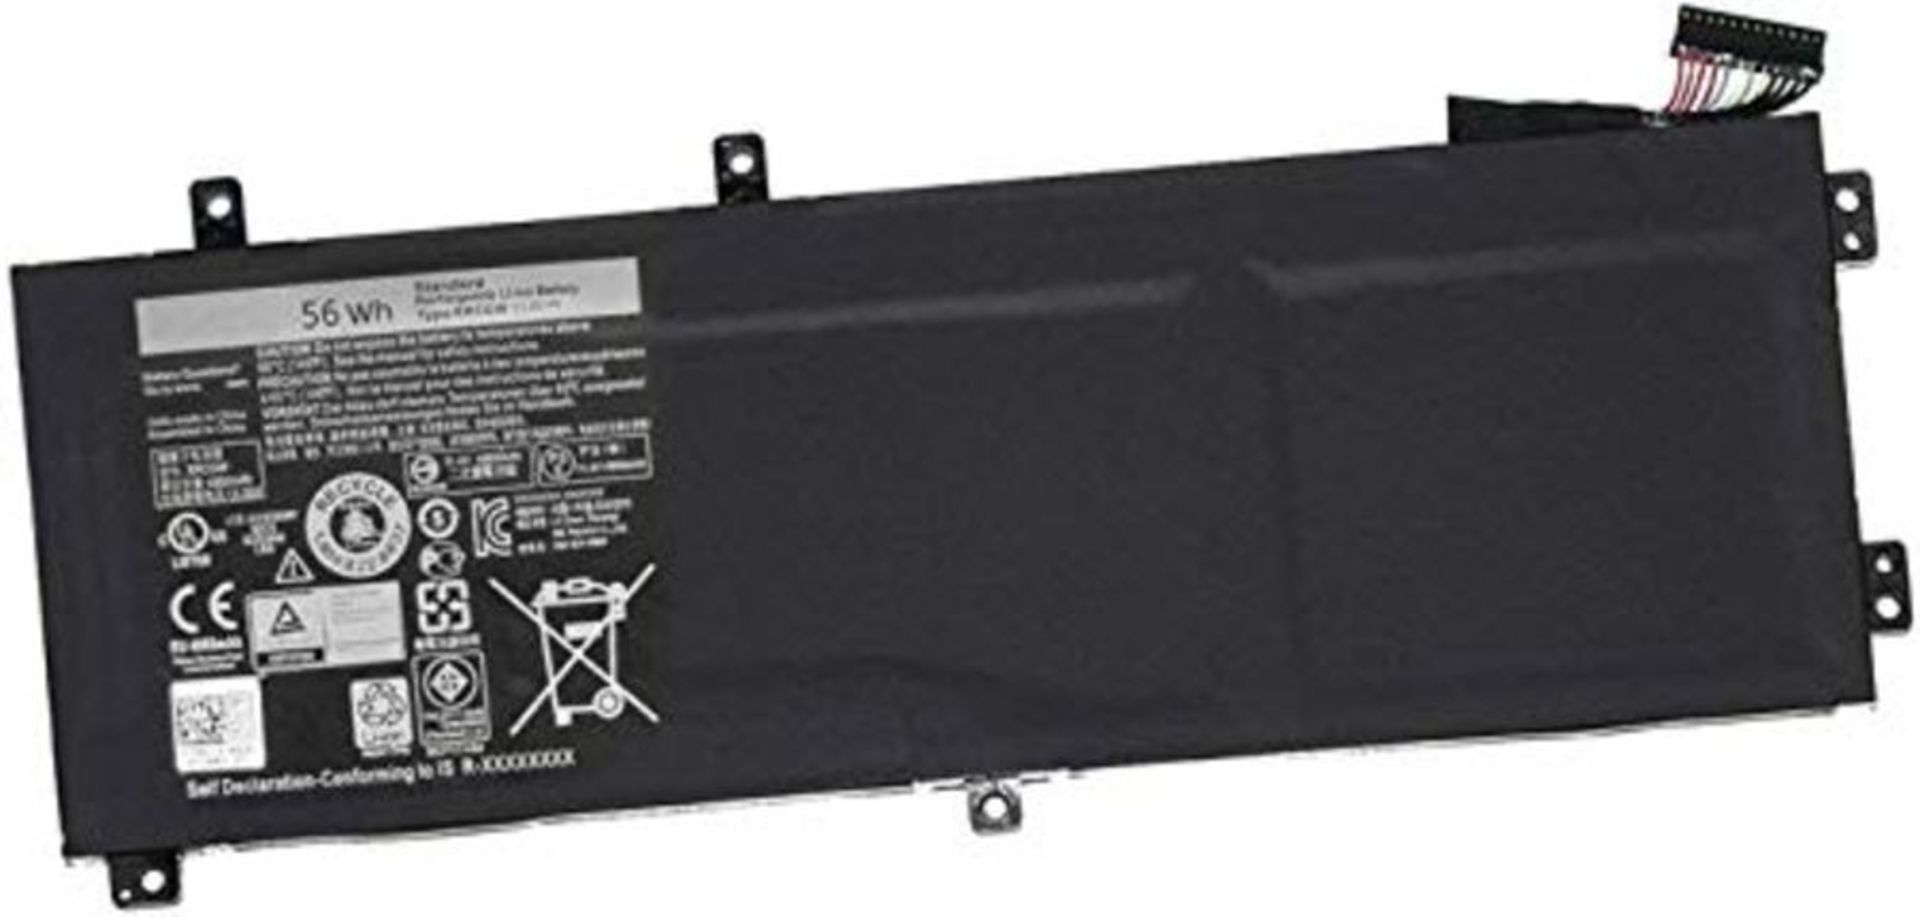 ASKC 56Wh RRCGW Laptop Battery Replacement for Dell XPS 15 9550 Precision 15 5510 Mobi